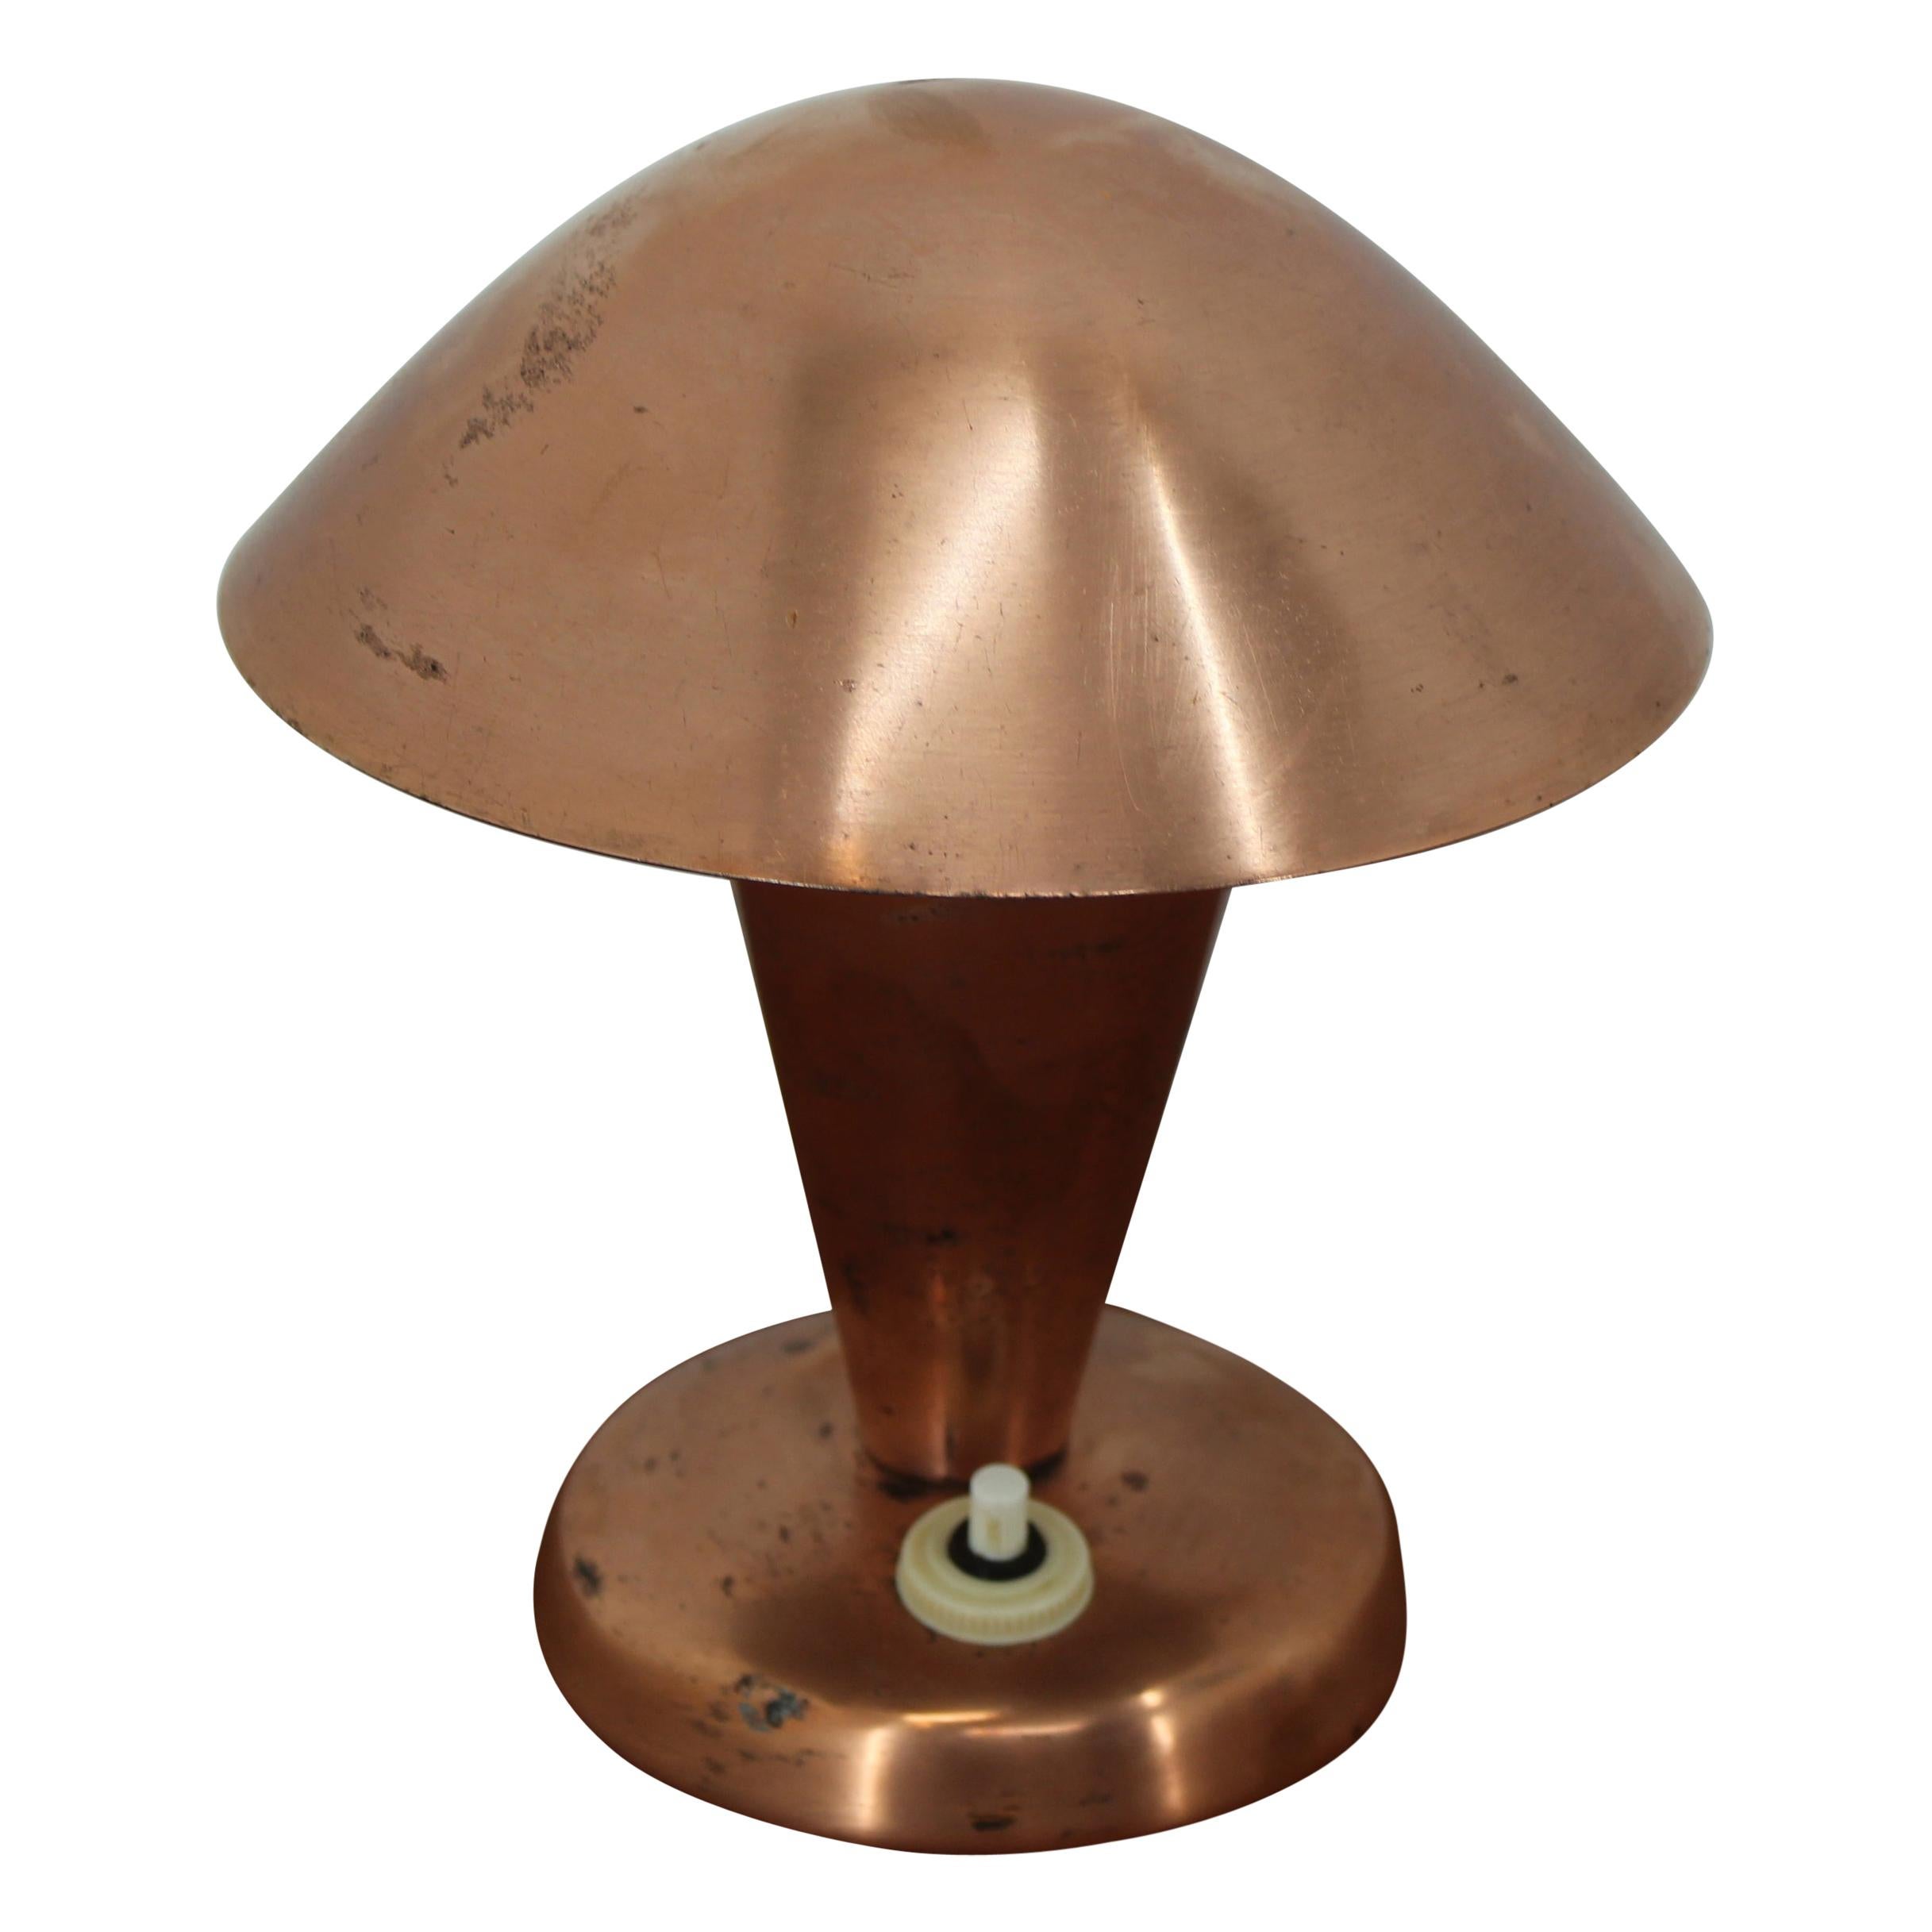 Bauhaus Table Lamp with Flexible Shade, 1930s For Sale